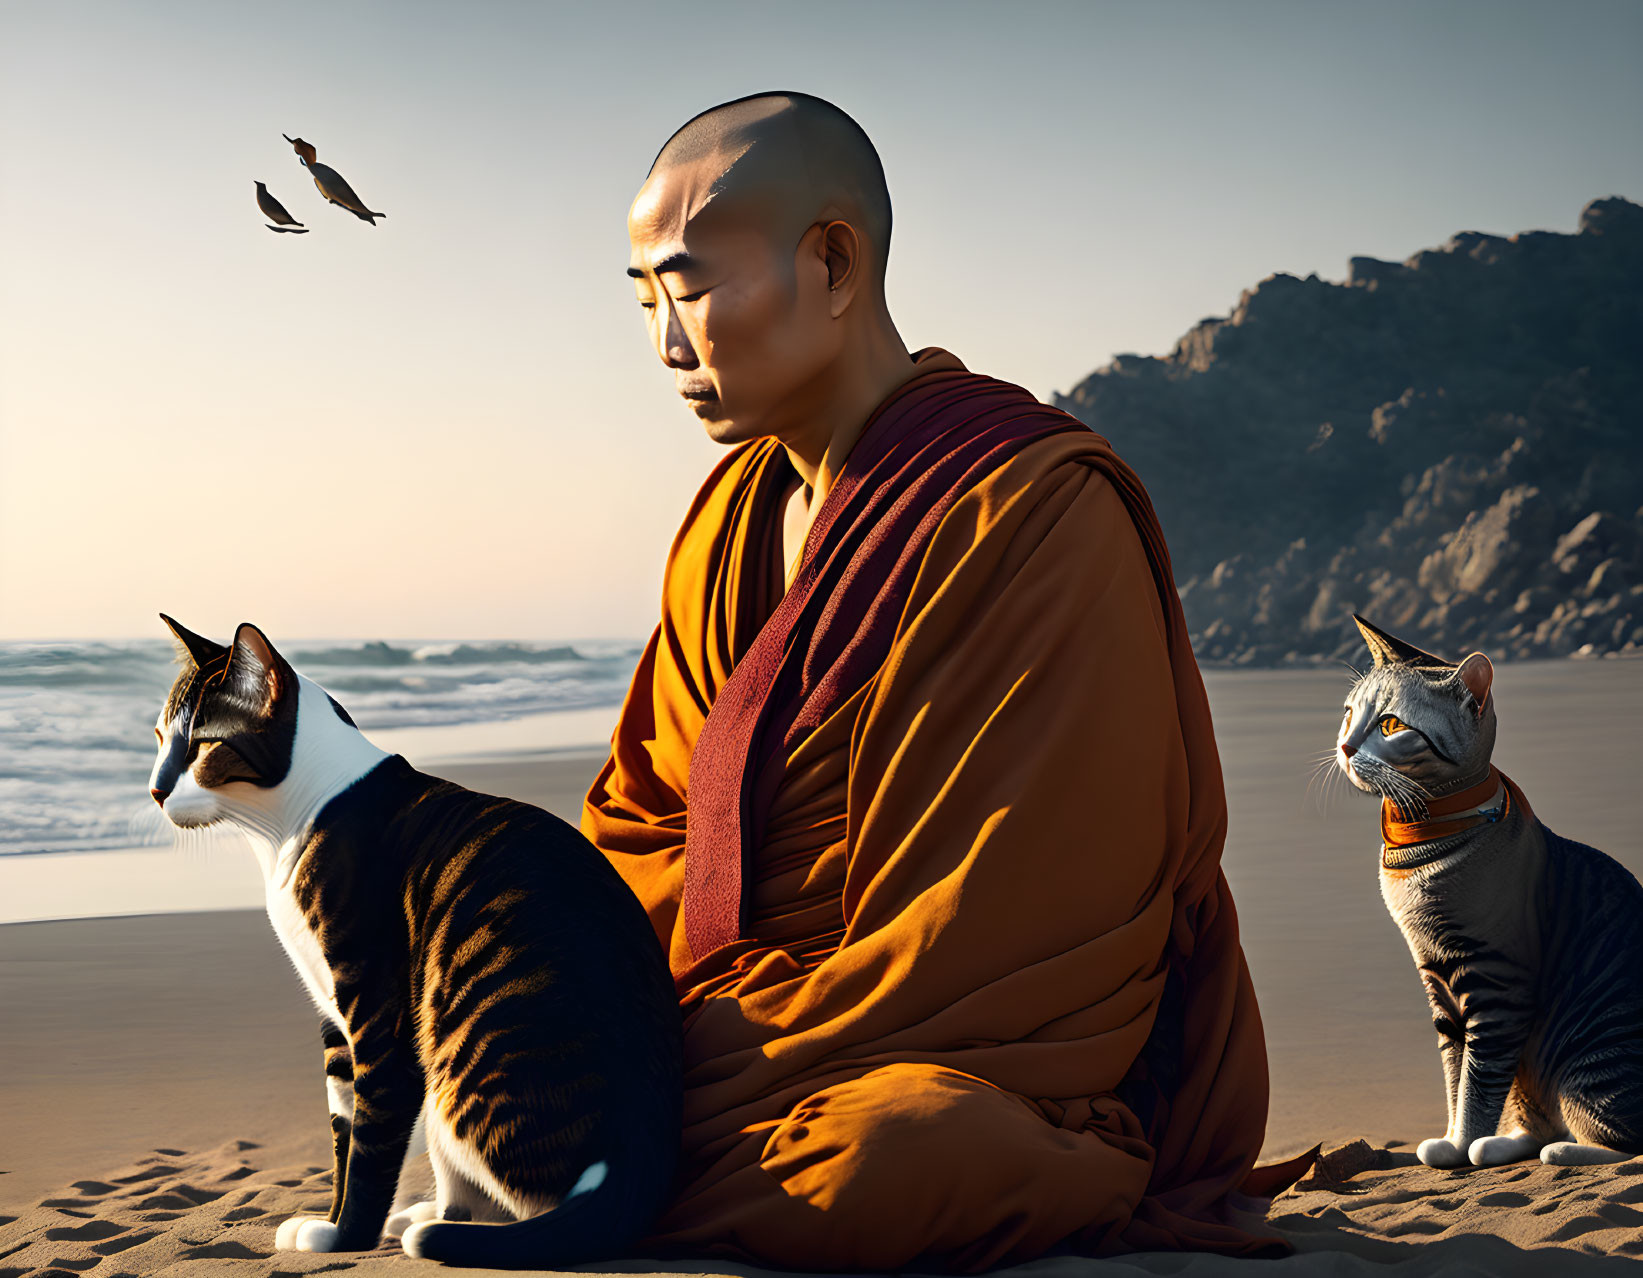 Meditating monk with cats on beach, mountains, bird in flight